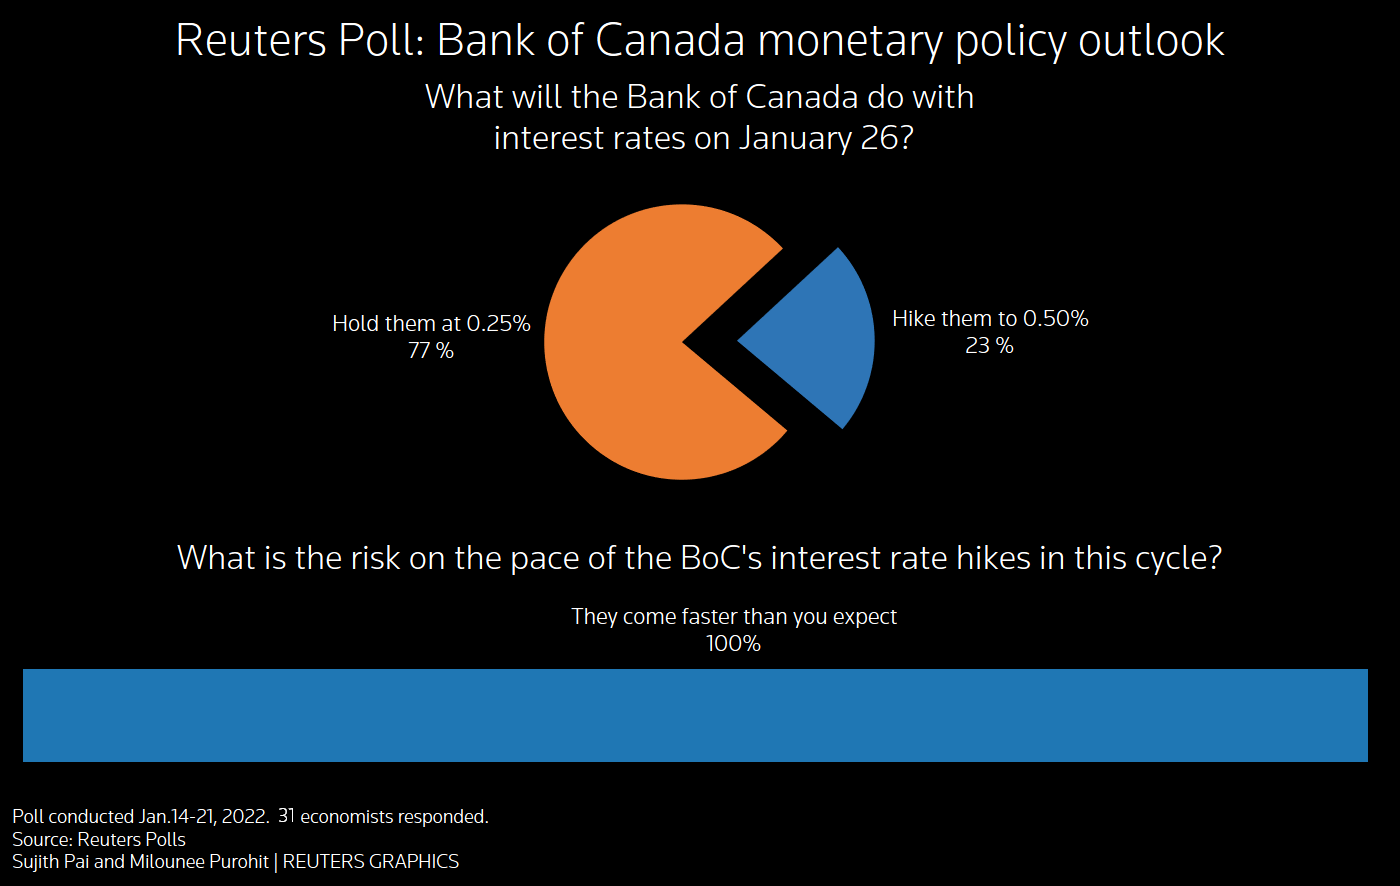 Reuters Poll: Bank of Canada monetary policy outlook